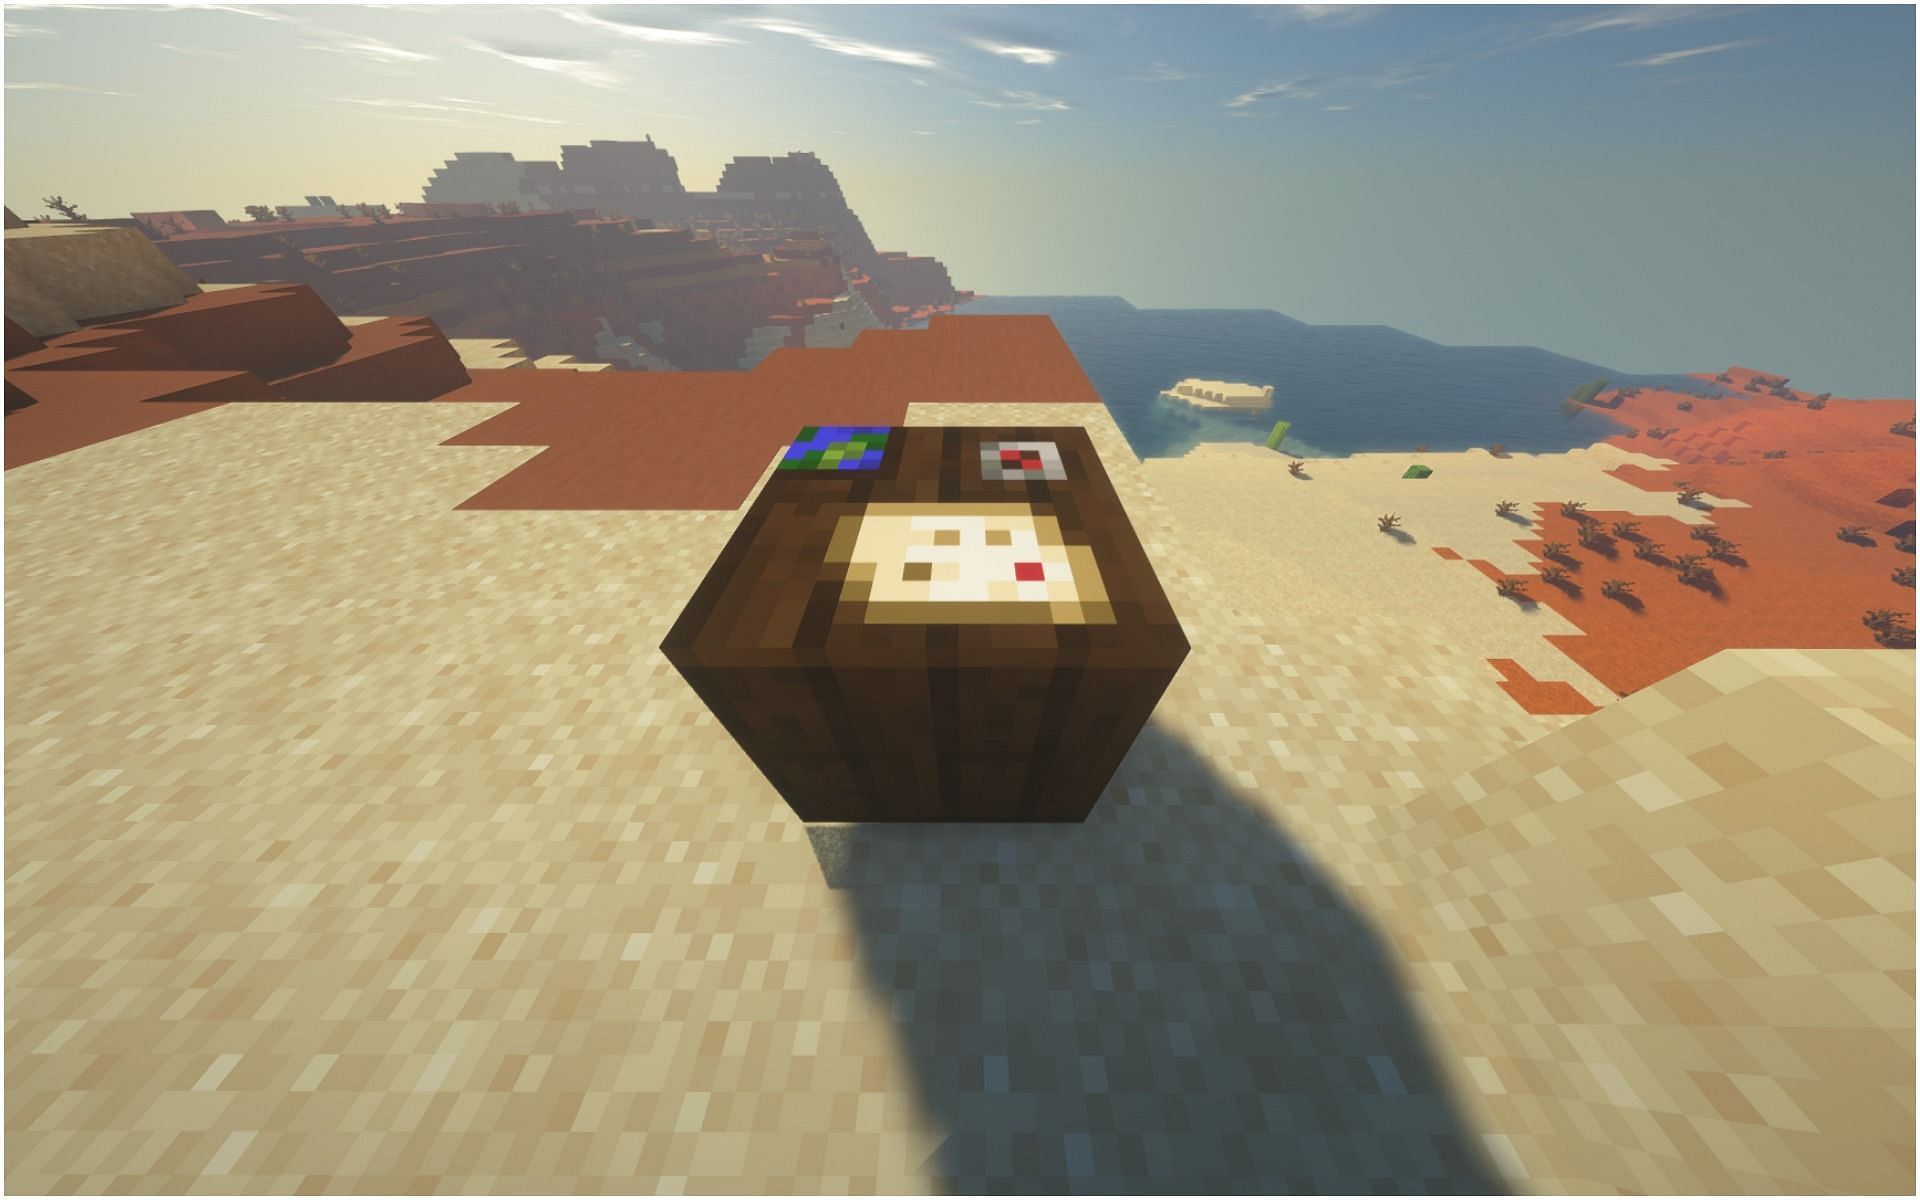 A Cartography Table in Minecraft (Image via Minecraft)